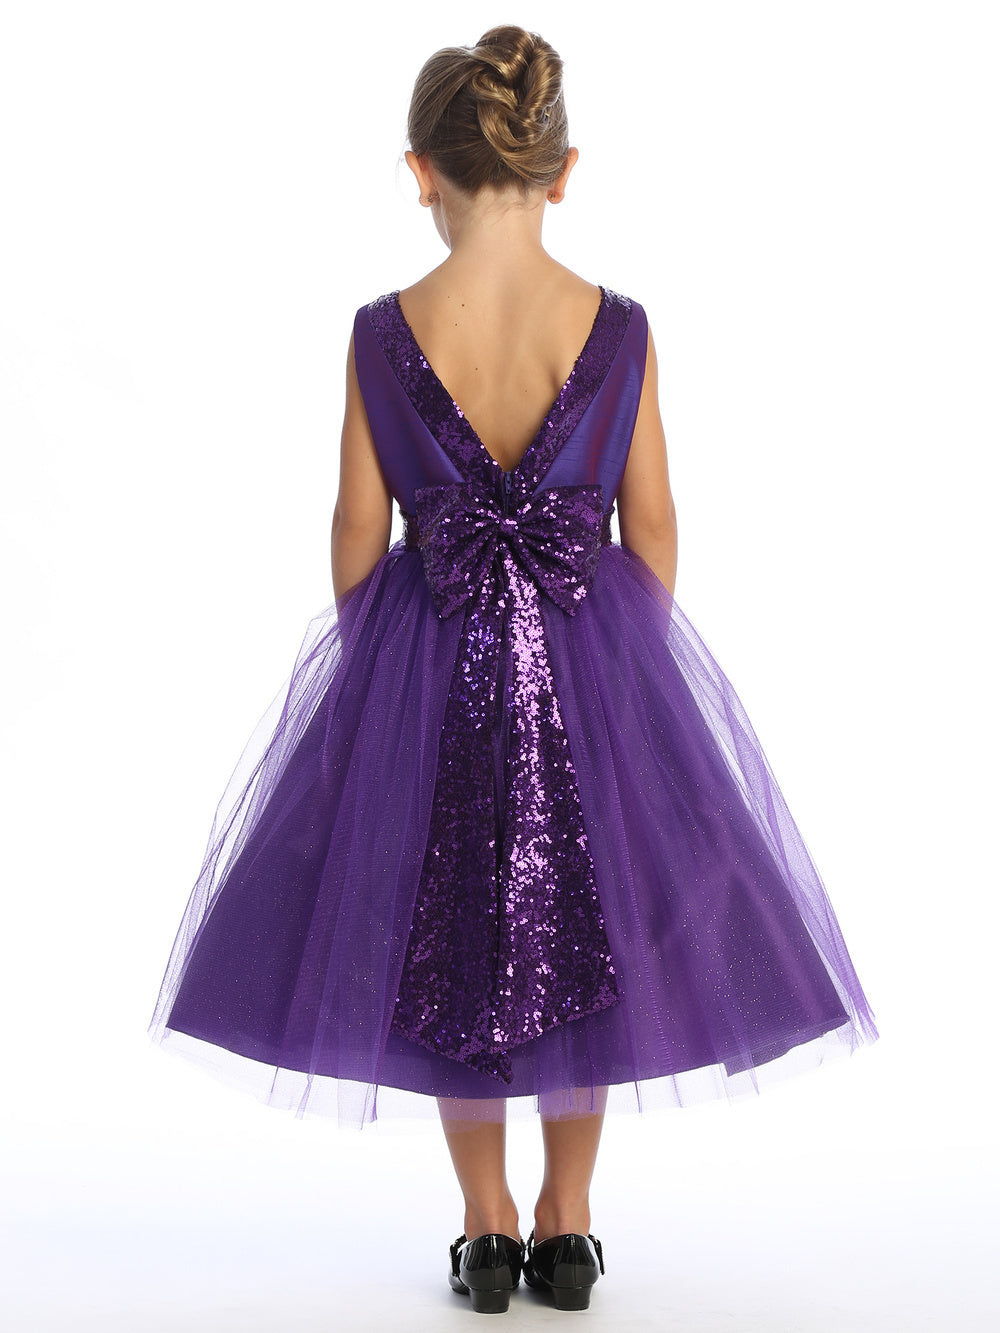 Purple shantung dress, adorned with sparkle tulle and sequins, crowns a radiant flower girl.